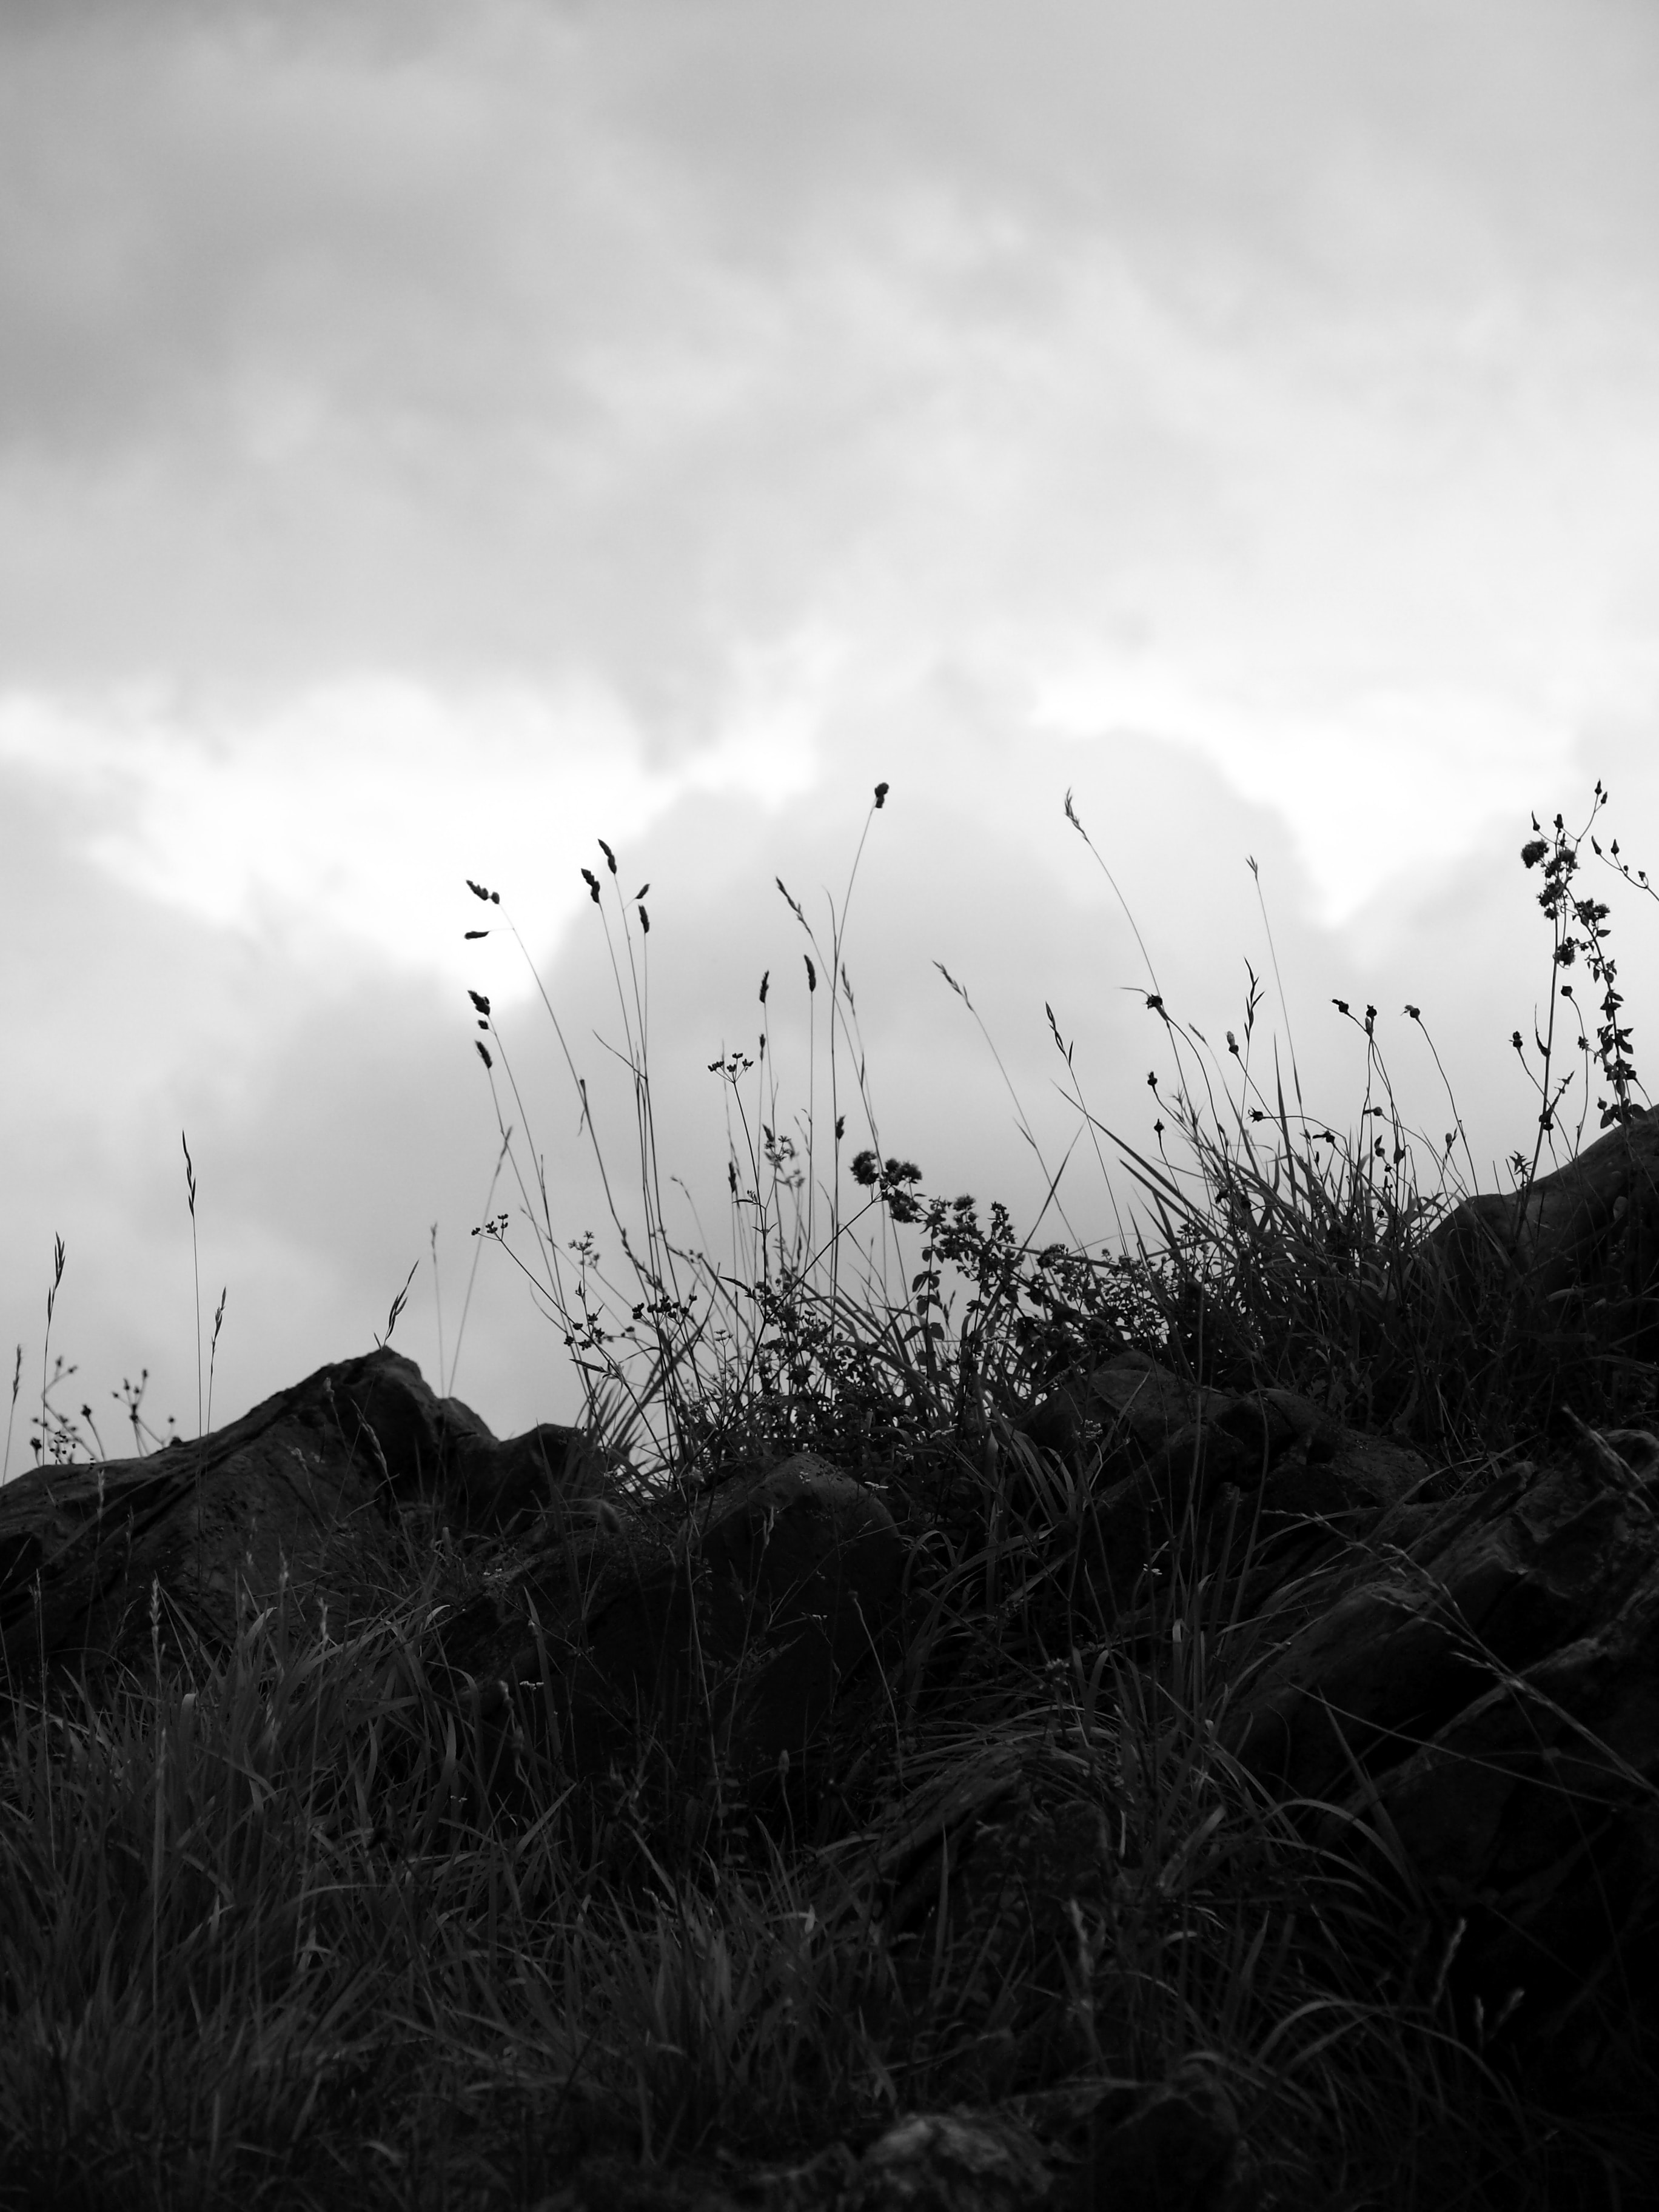 clouds, nature, grass, stones, sky, bw, chb, hill images